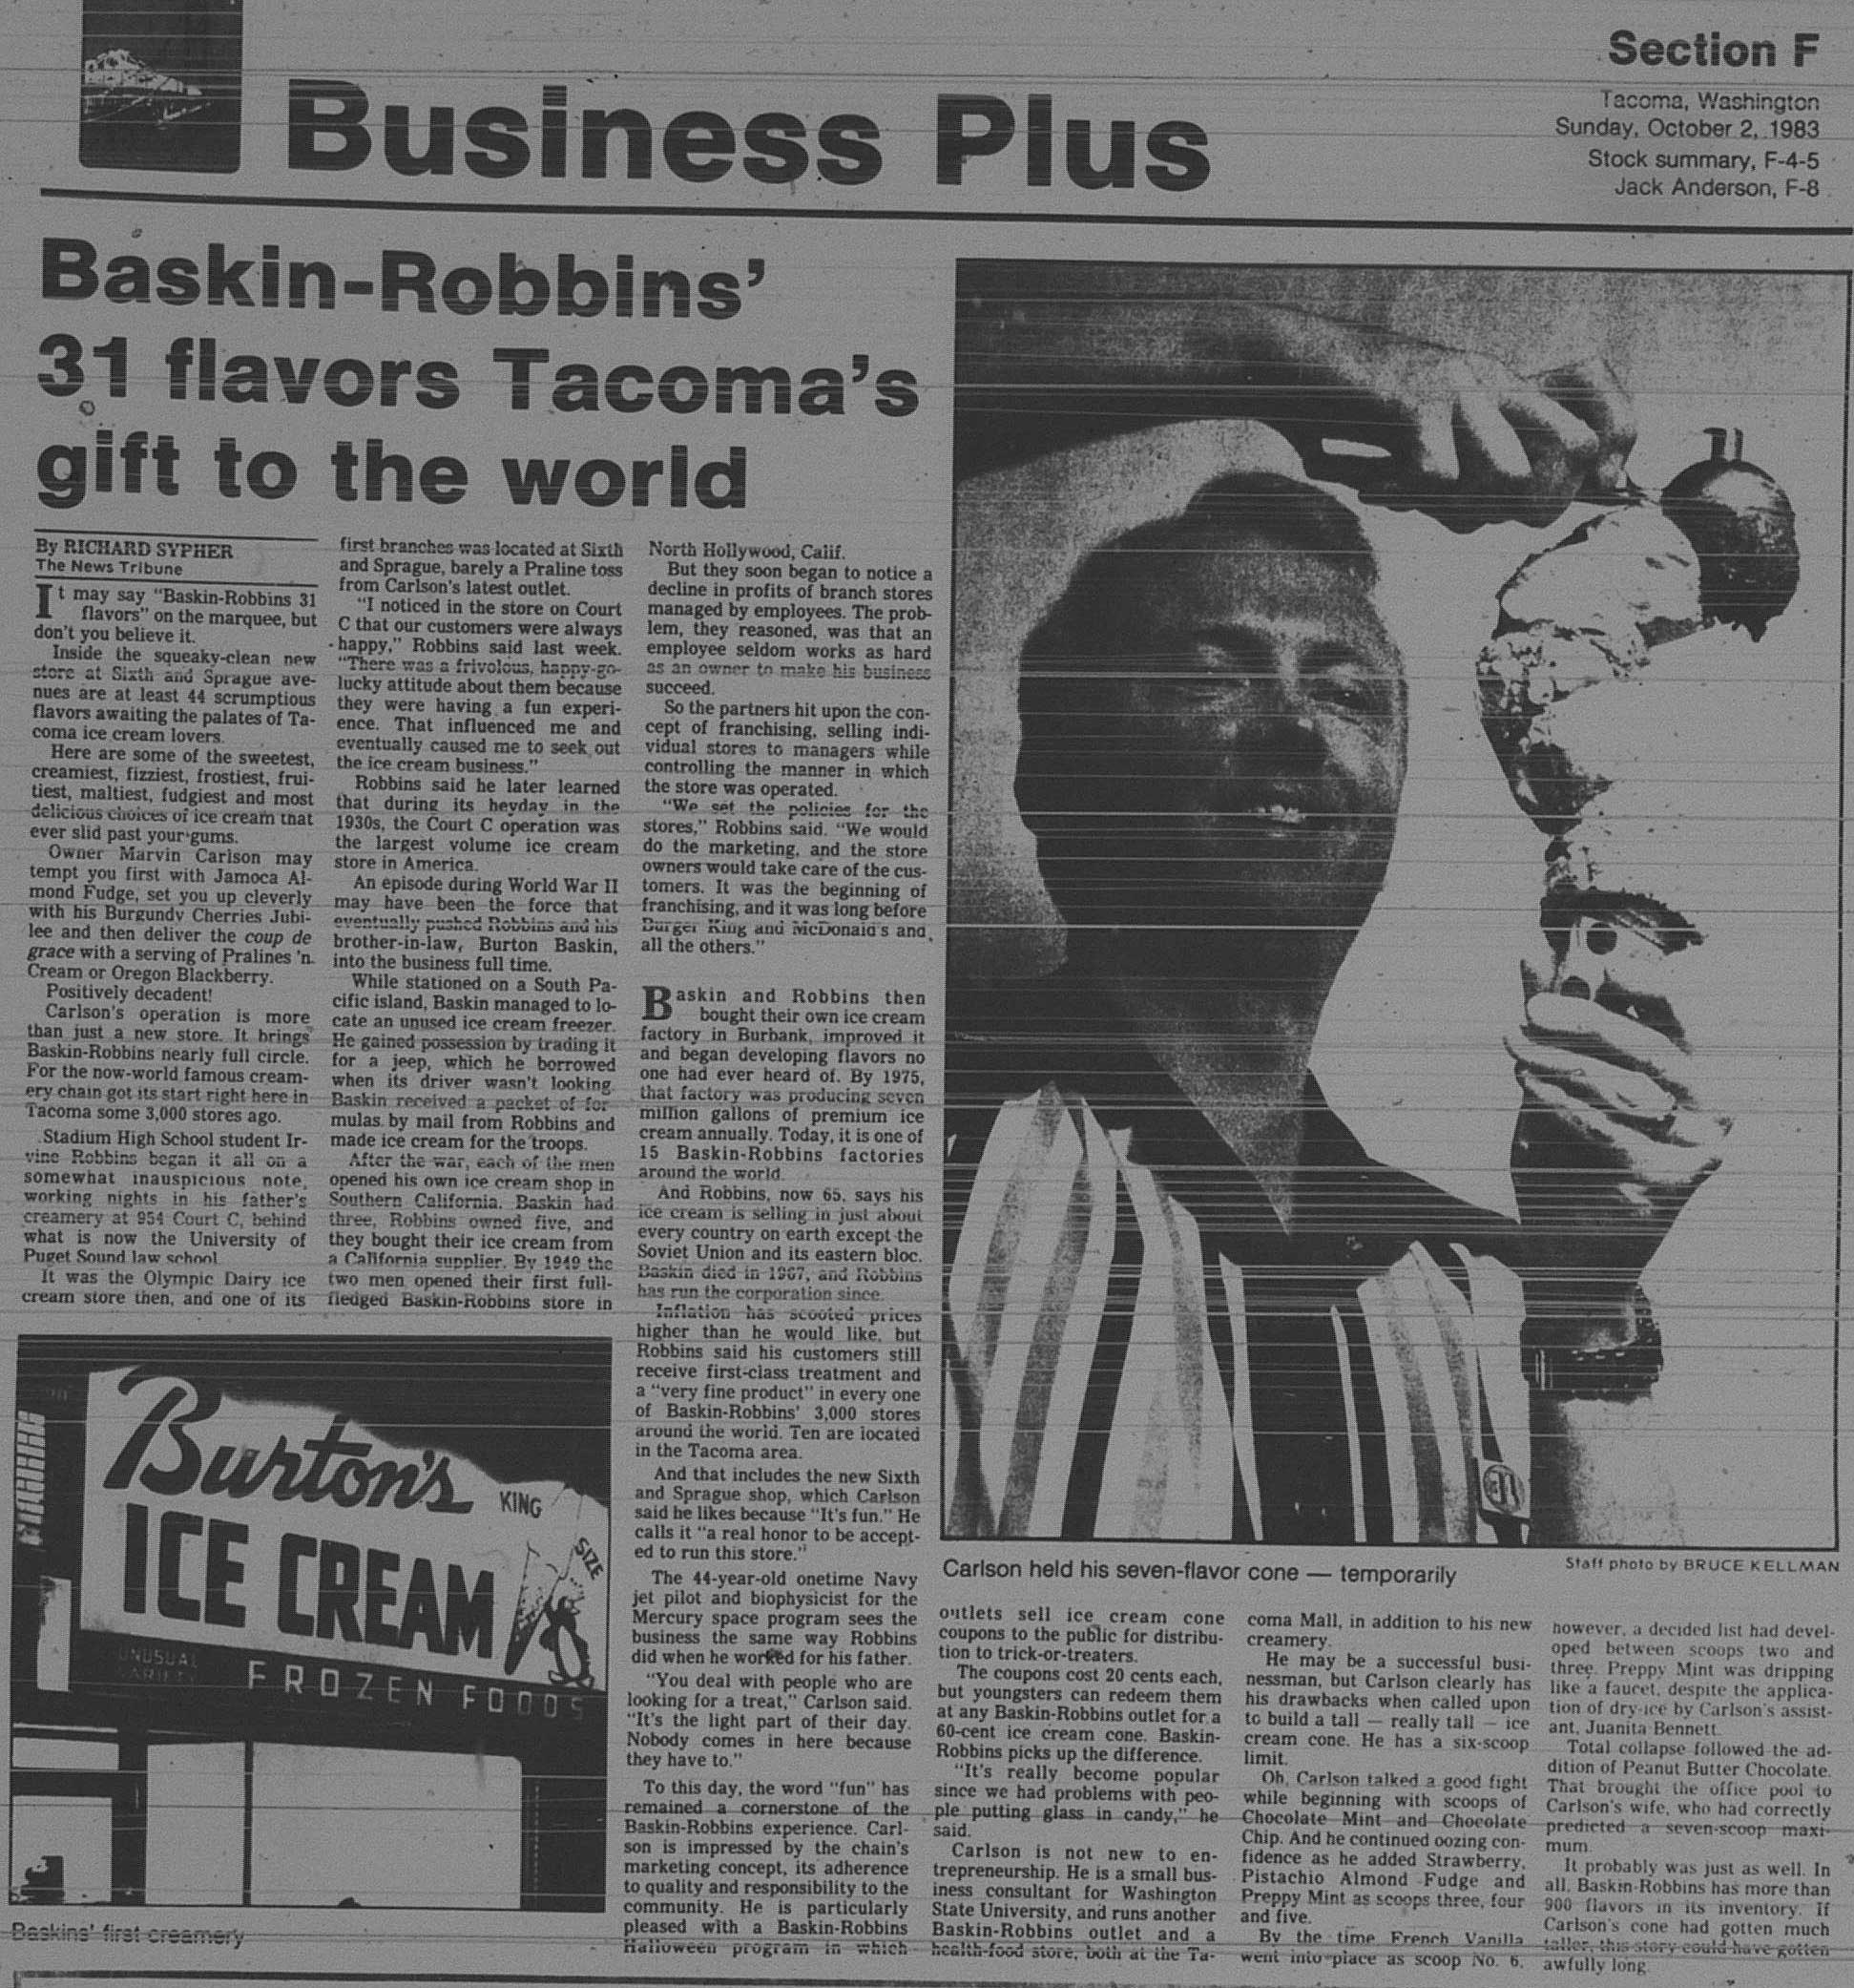 TNT 10/2/1983: Baskin-Robbins' 31 flavors Tacoma's gift to the world